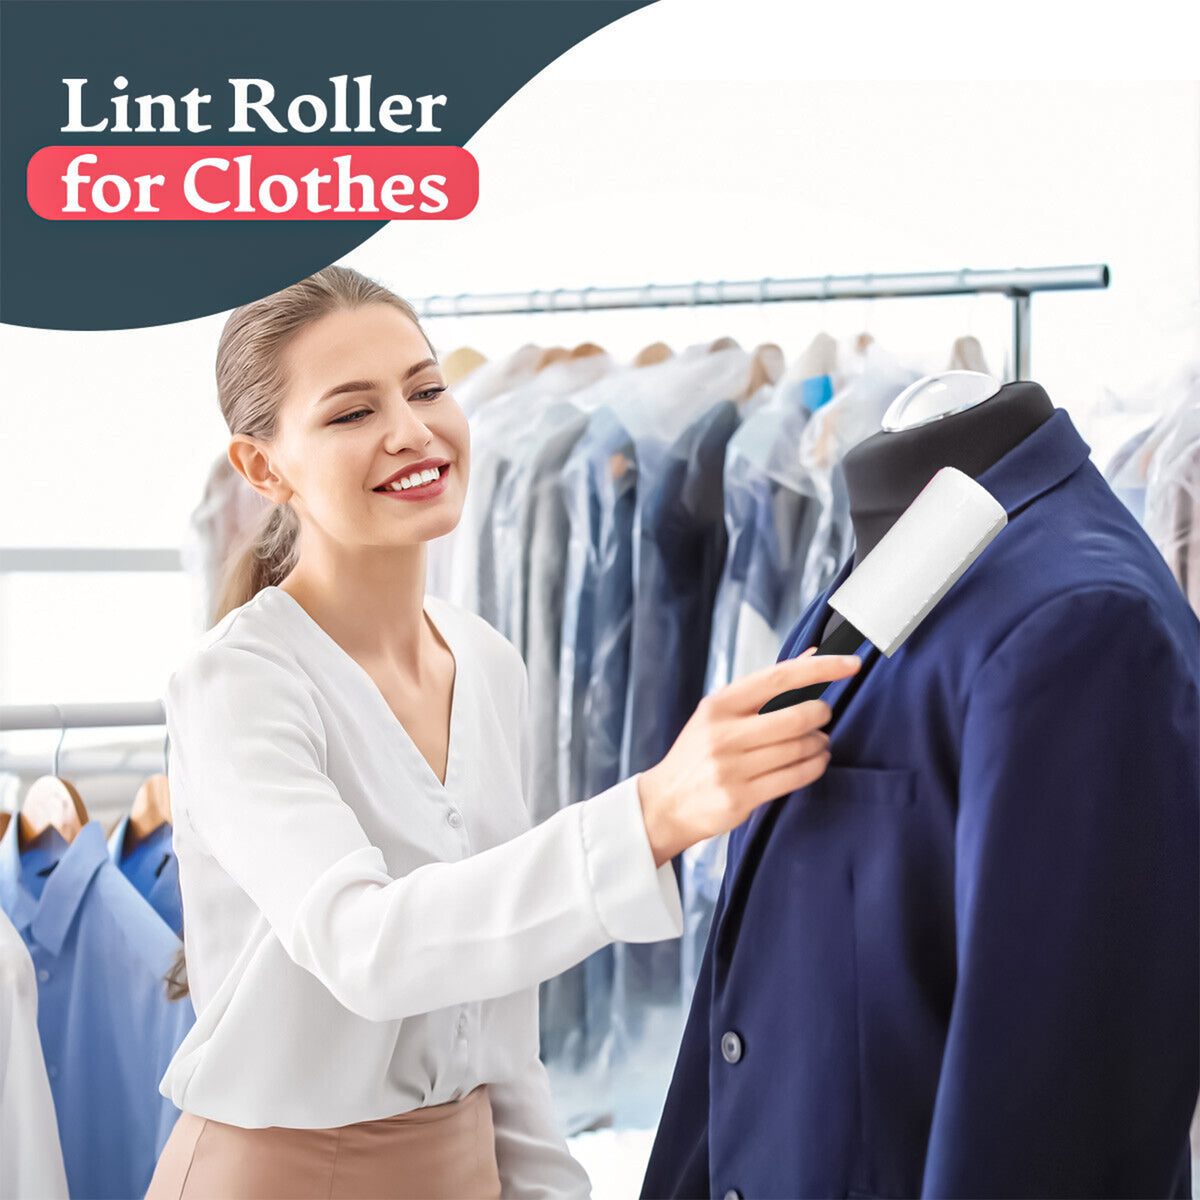 Lint Rollers for Clothes